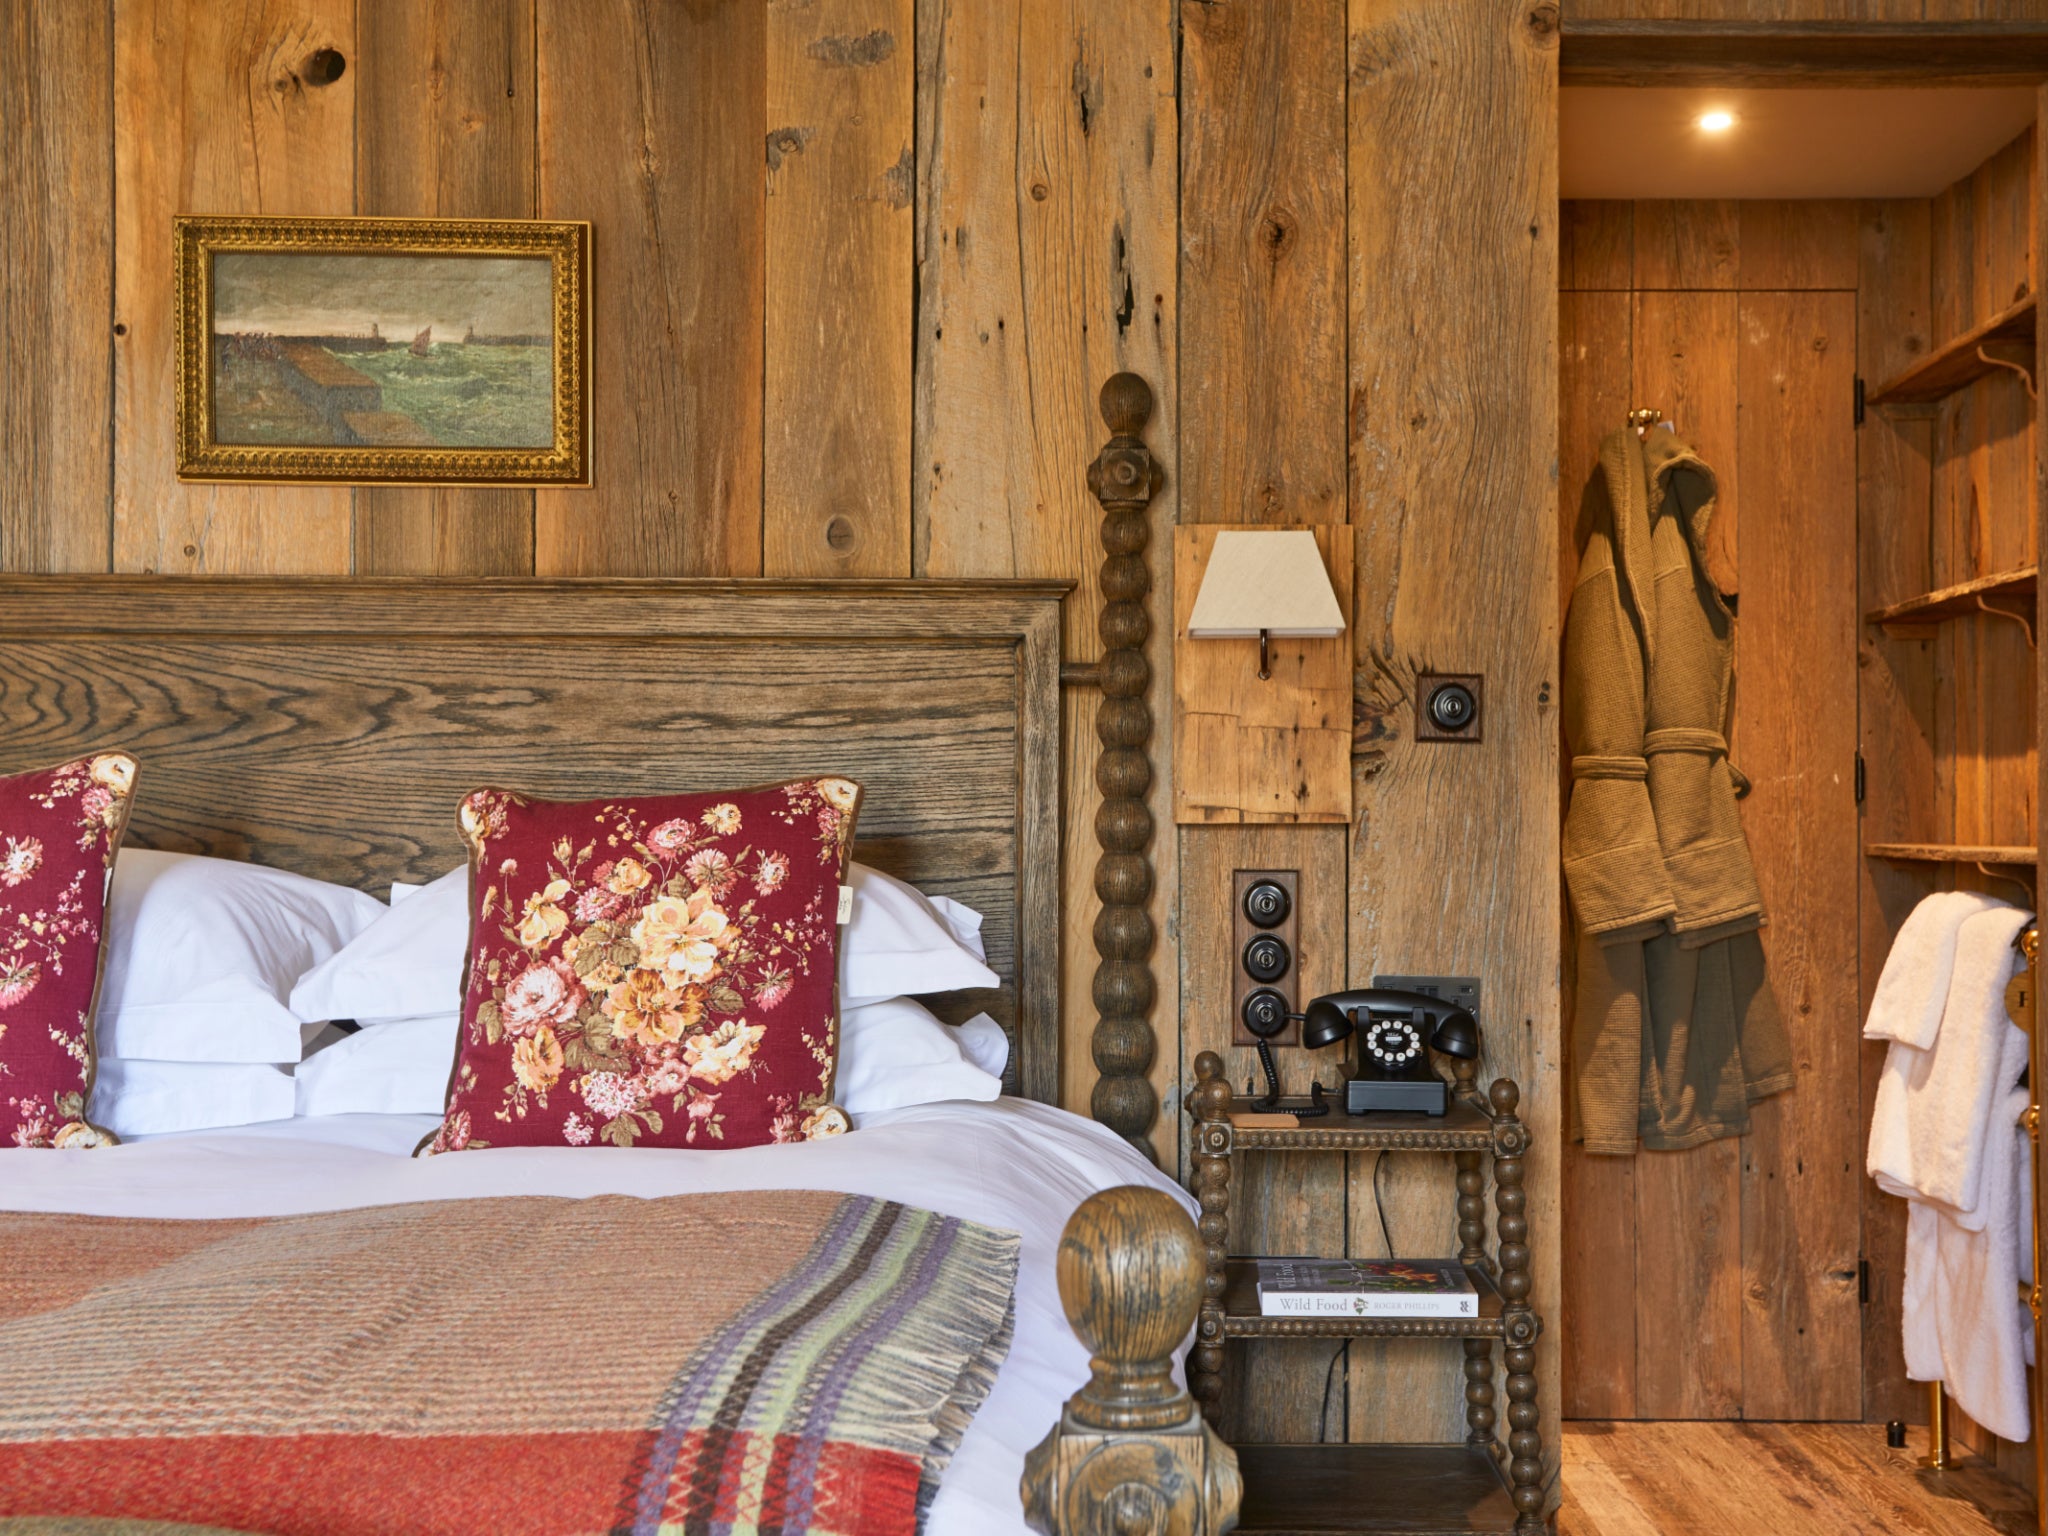 The Pig’s 30 rooms above Harlyn Bay beach are cosy and calming